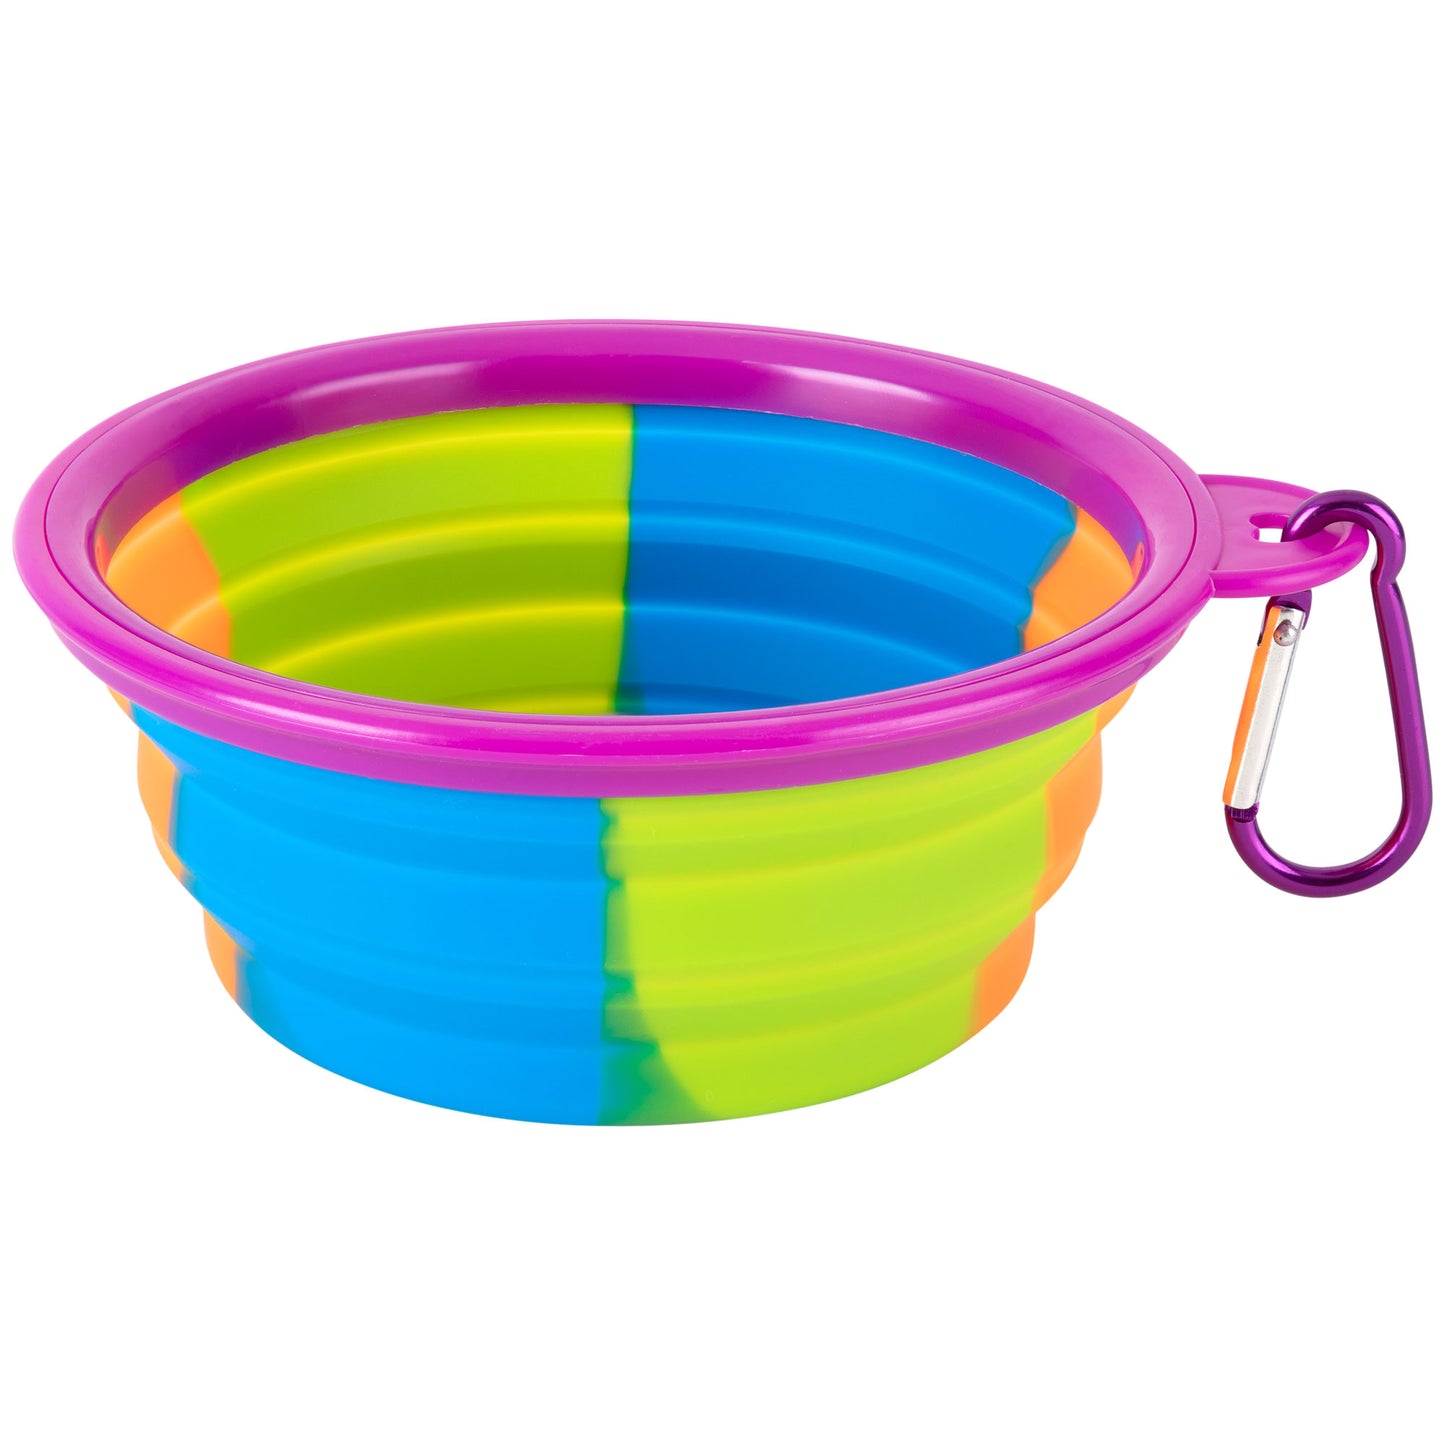 Silicone Travel Pet Dish with Carabiner